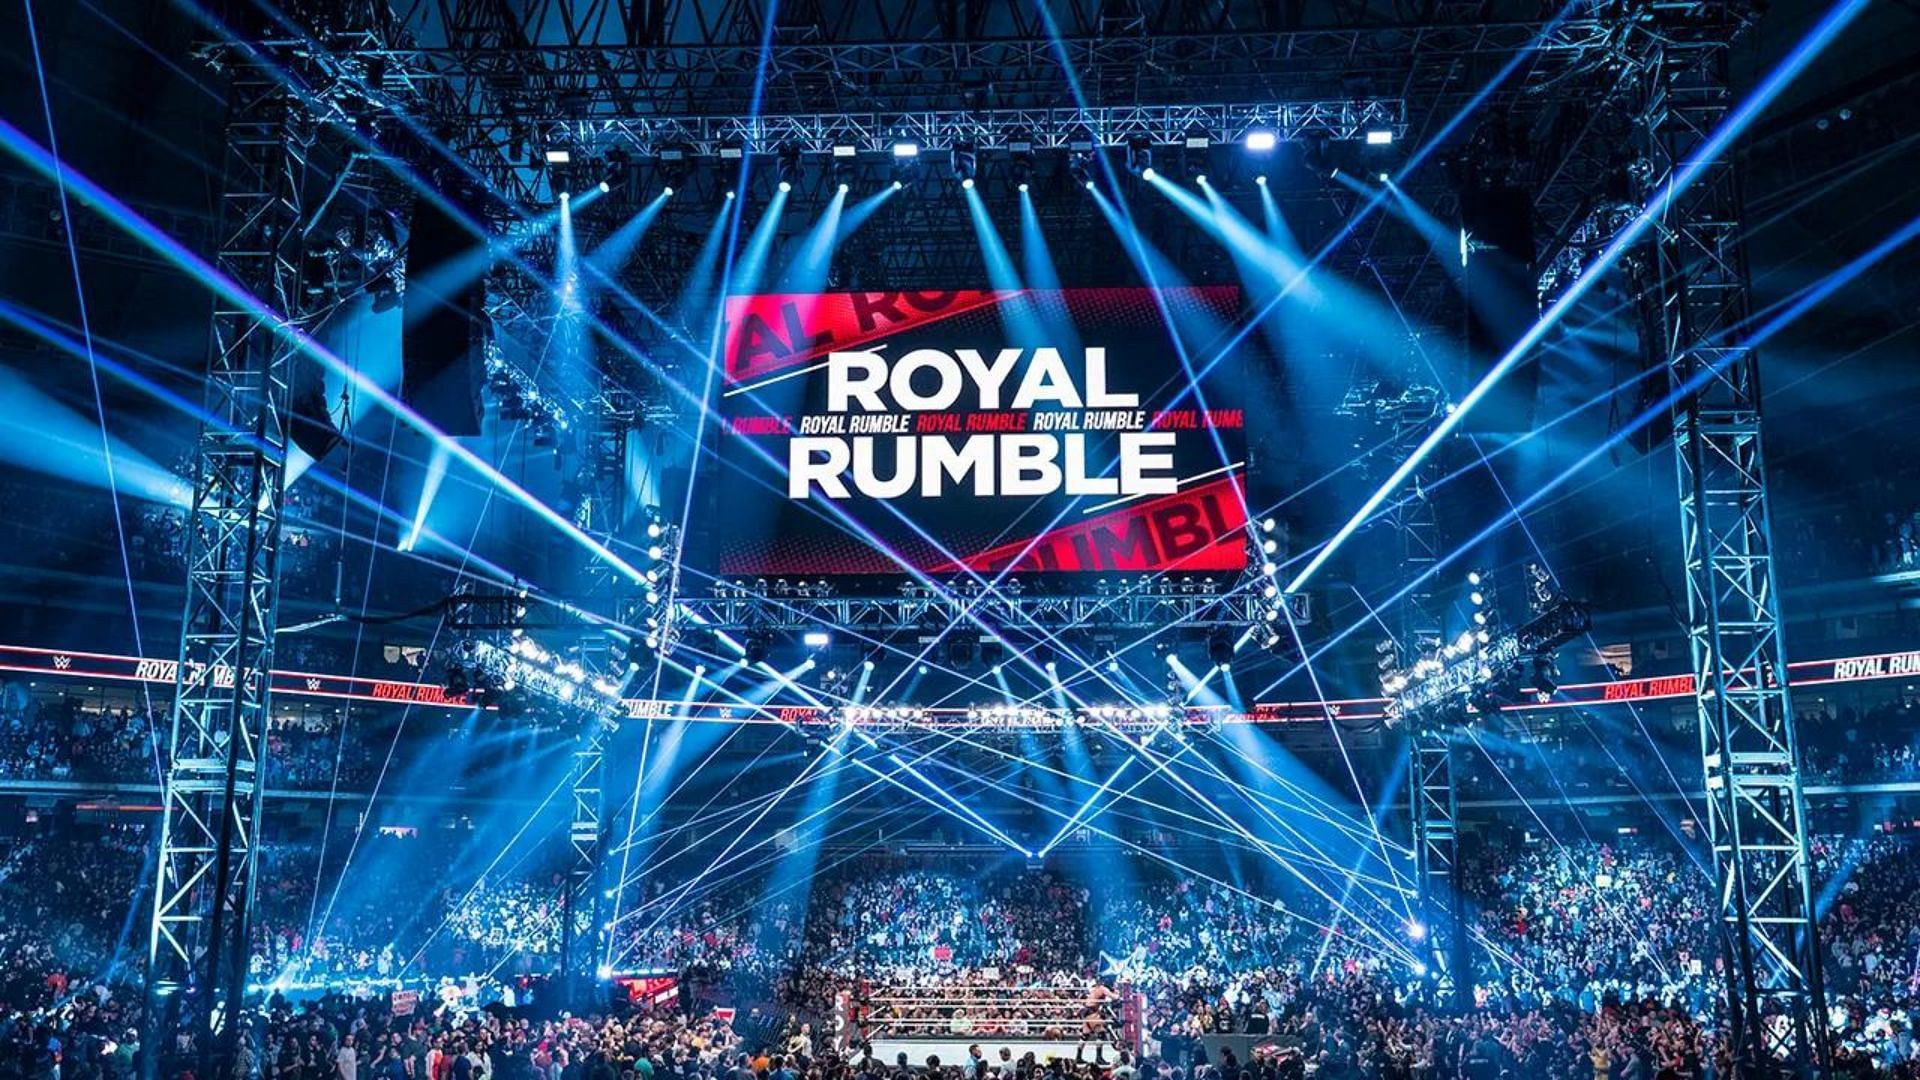 Royal Rumble 2023 Tickets Are tickets for WWE Royal Rumble 2023 sold out?